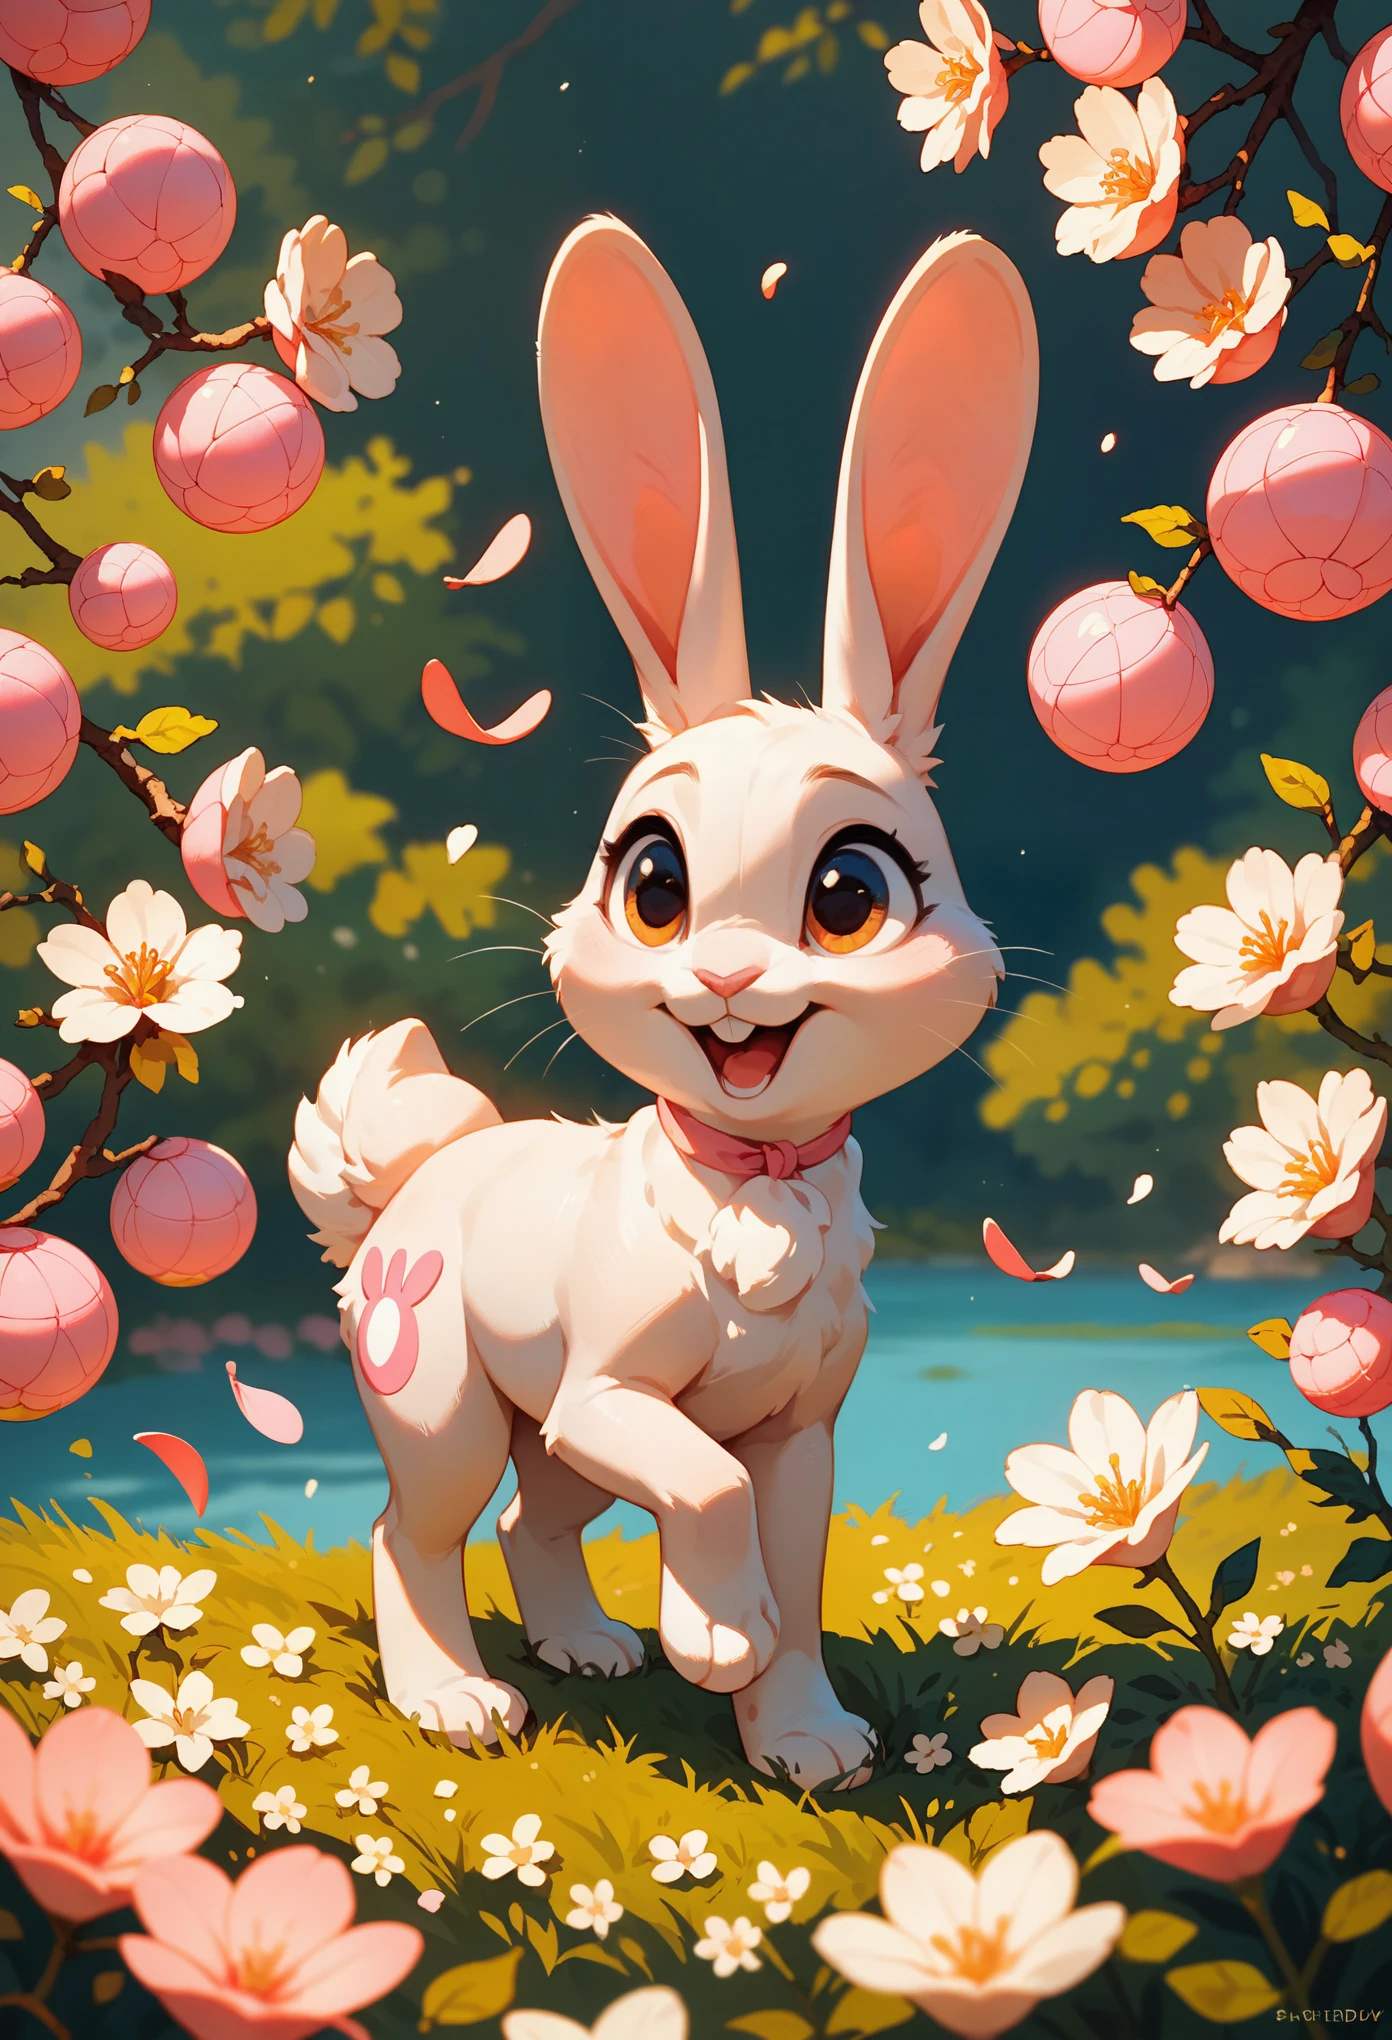 score_9, score_8_up, score_7_up, an adorable bunny, ambient spring, white and pink tetradic colors